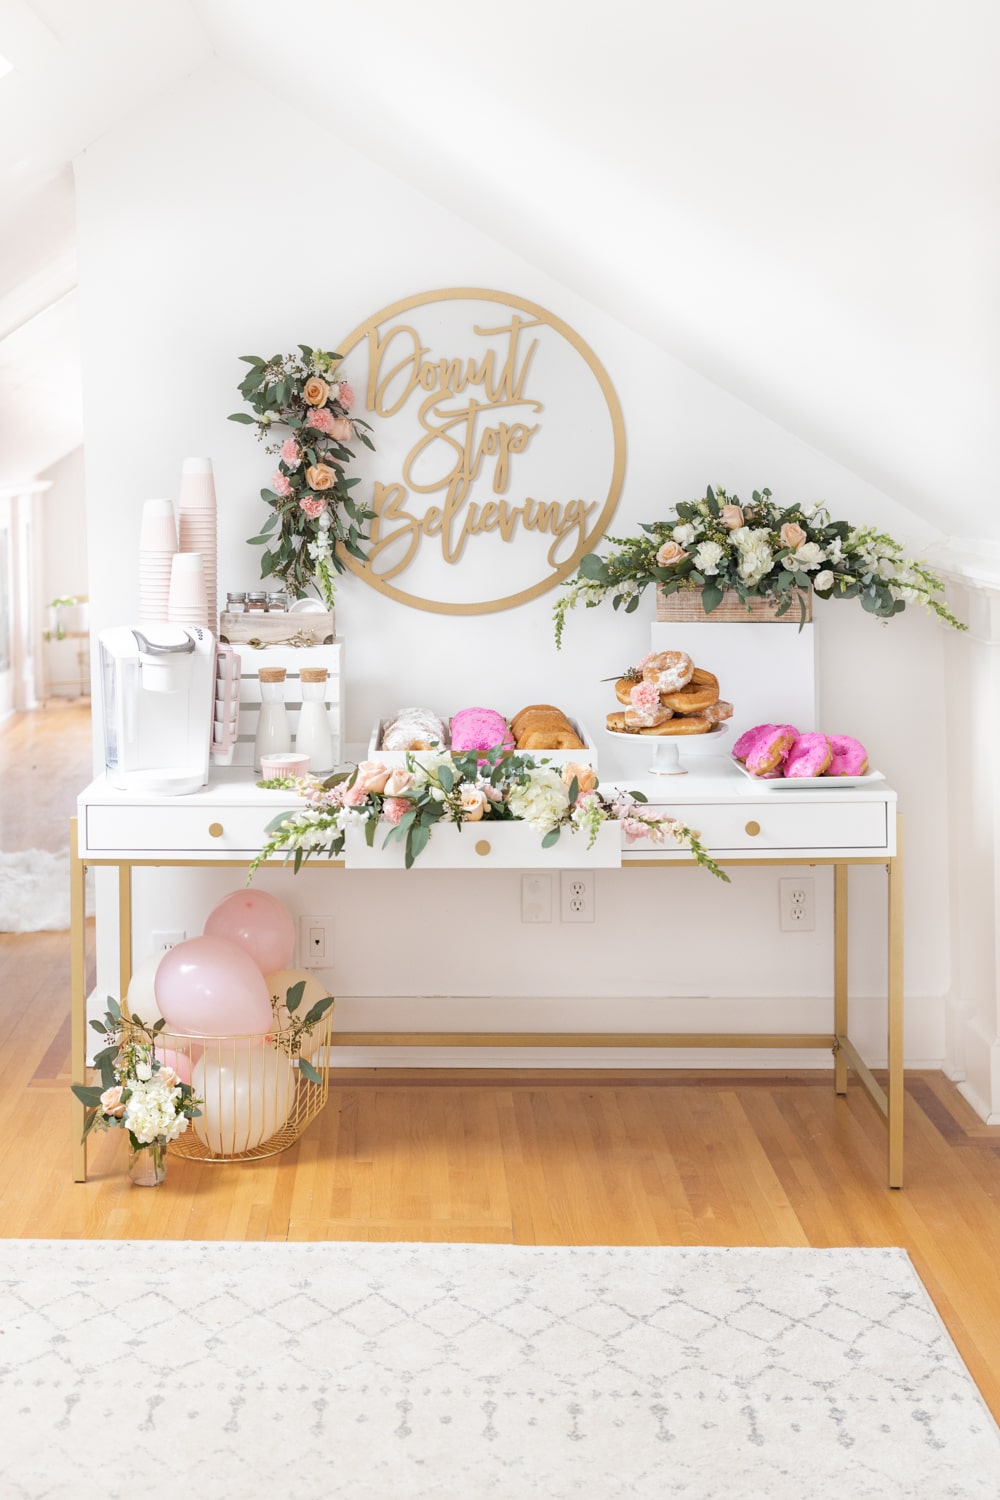 Donut theme party created by blogger Stephanie Ziajka on Diary of a Debutante